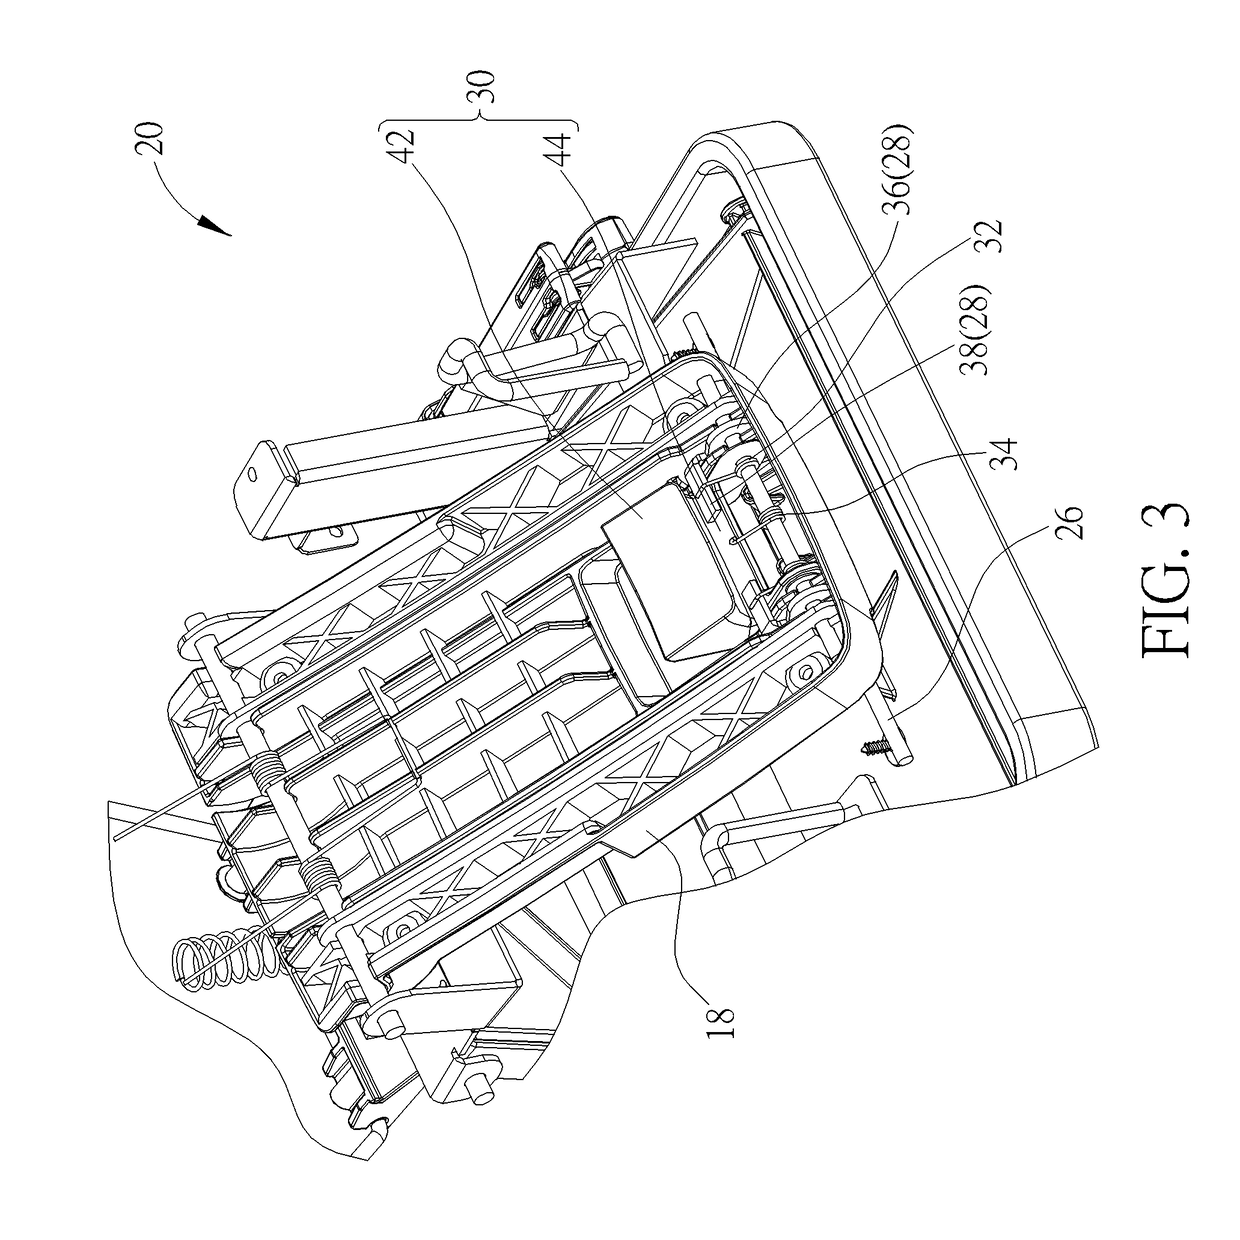 Safety belt assembling device capable of assembling a child restraint system with a vehicle seat